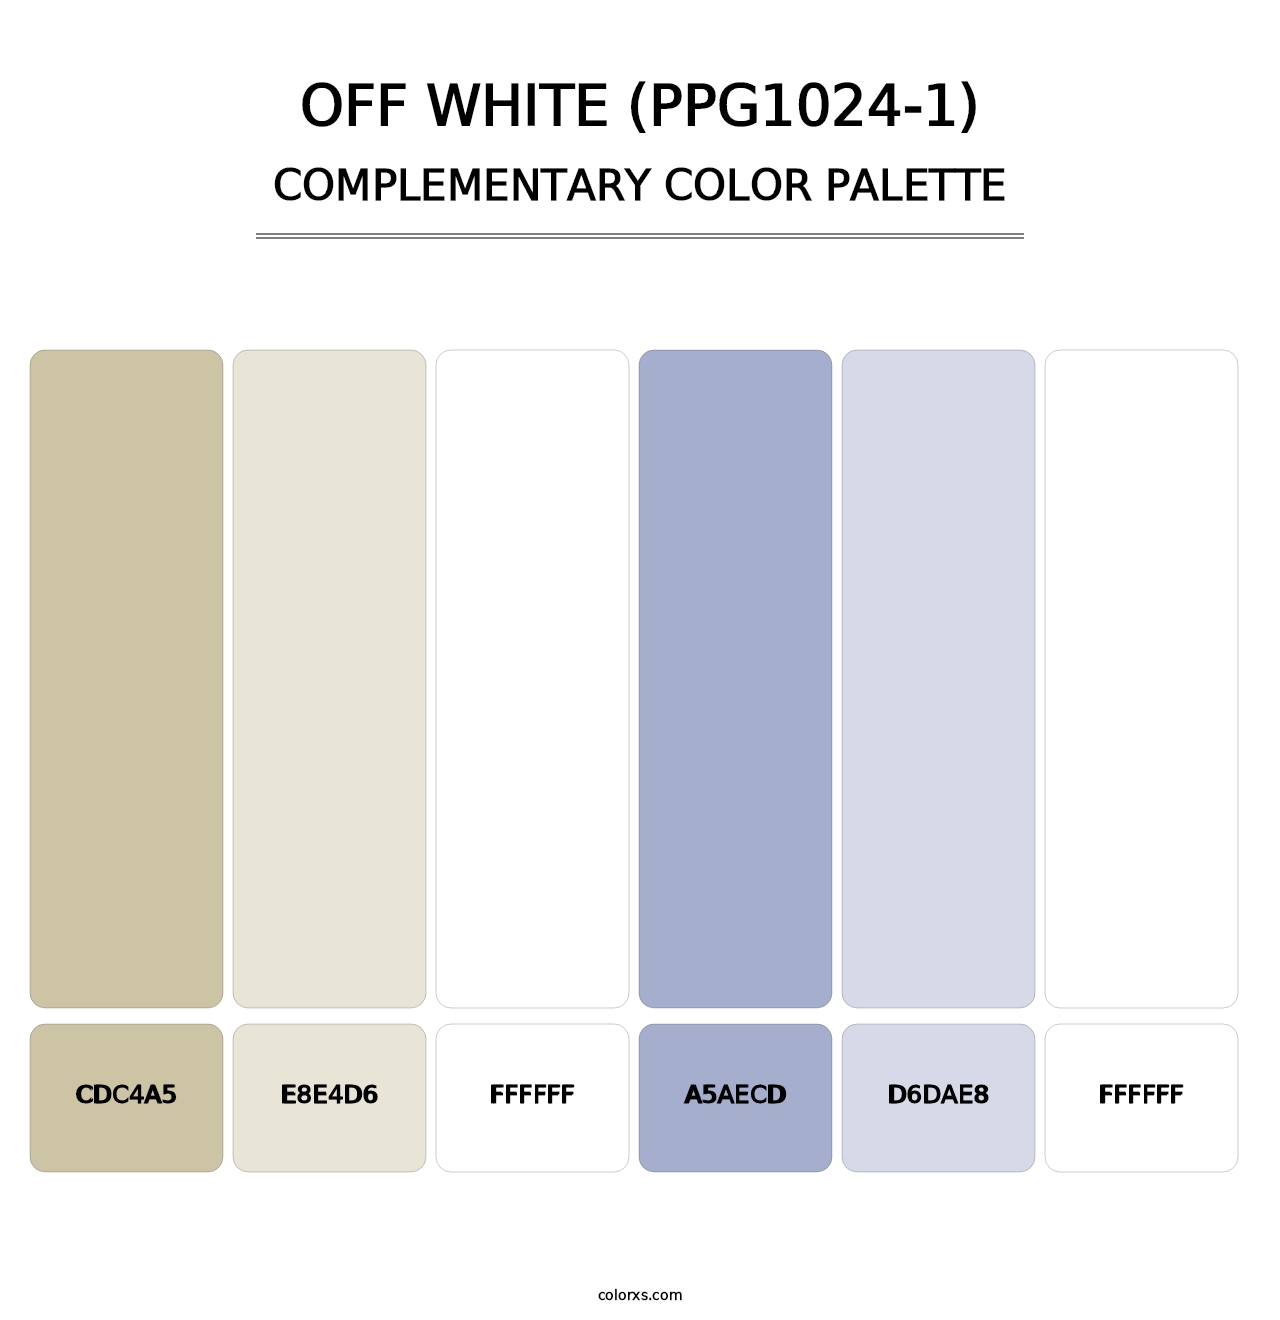 Off White (PPG1024-1) - Complementary Color Palette